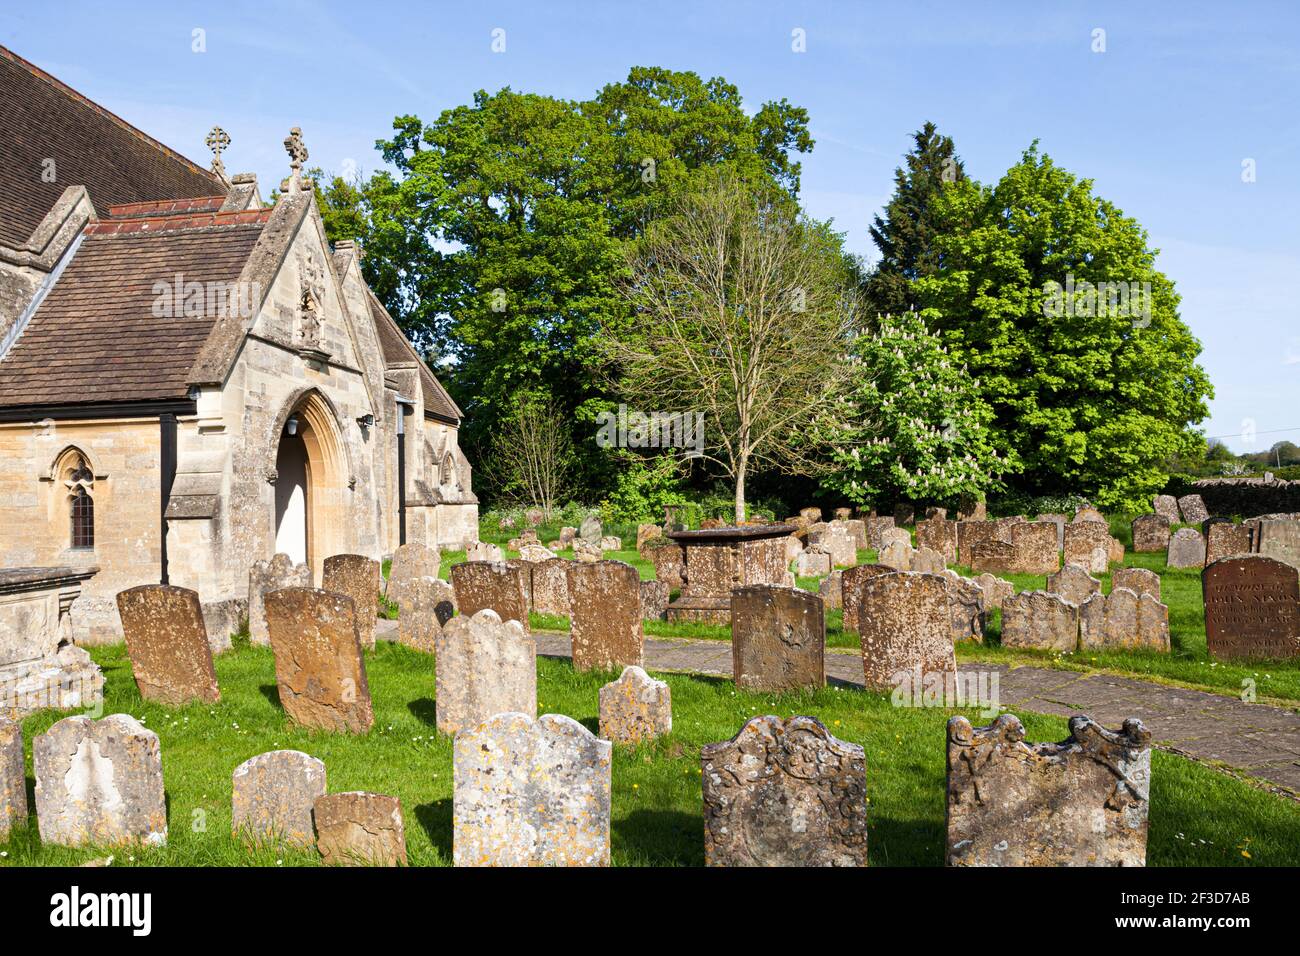 The church of St Martin at Bladon, Oxfordshire UK - Sir Winston Churchill and his wife are buried in the churchyard Stock Photo